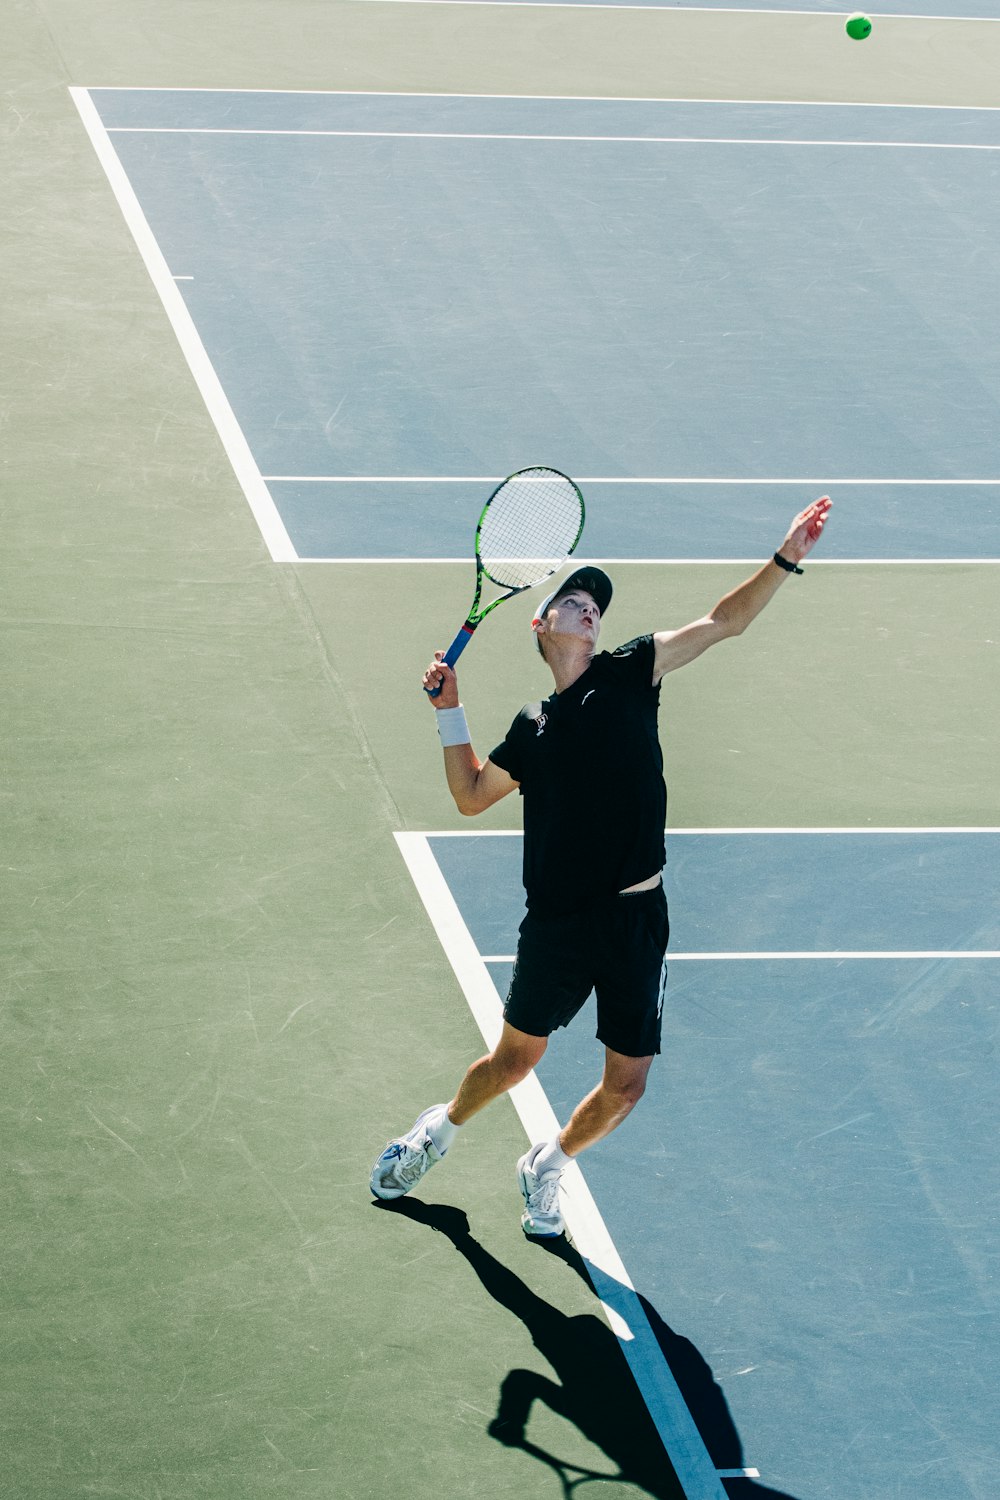 a male tennis player in a black shirt is playing tennis